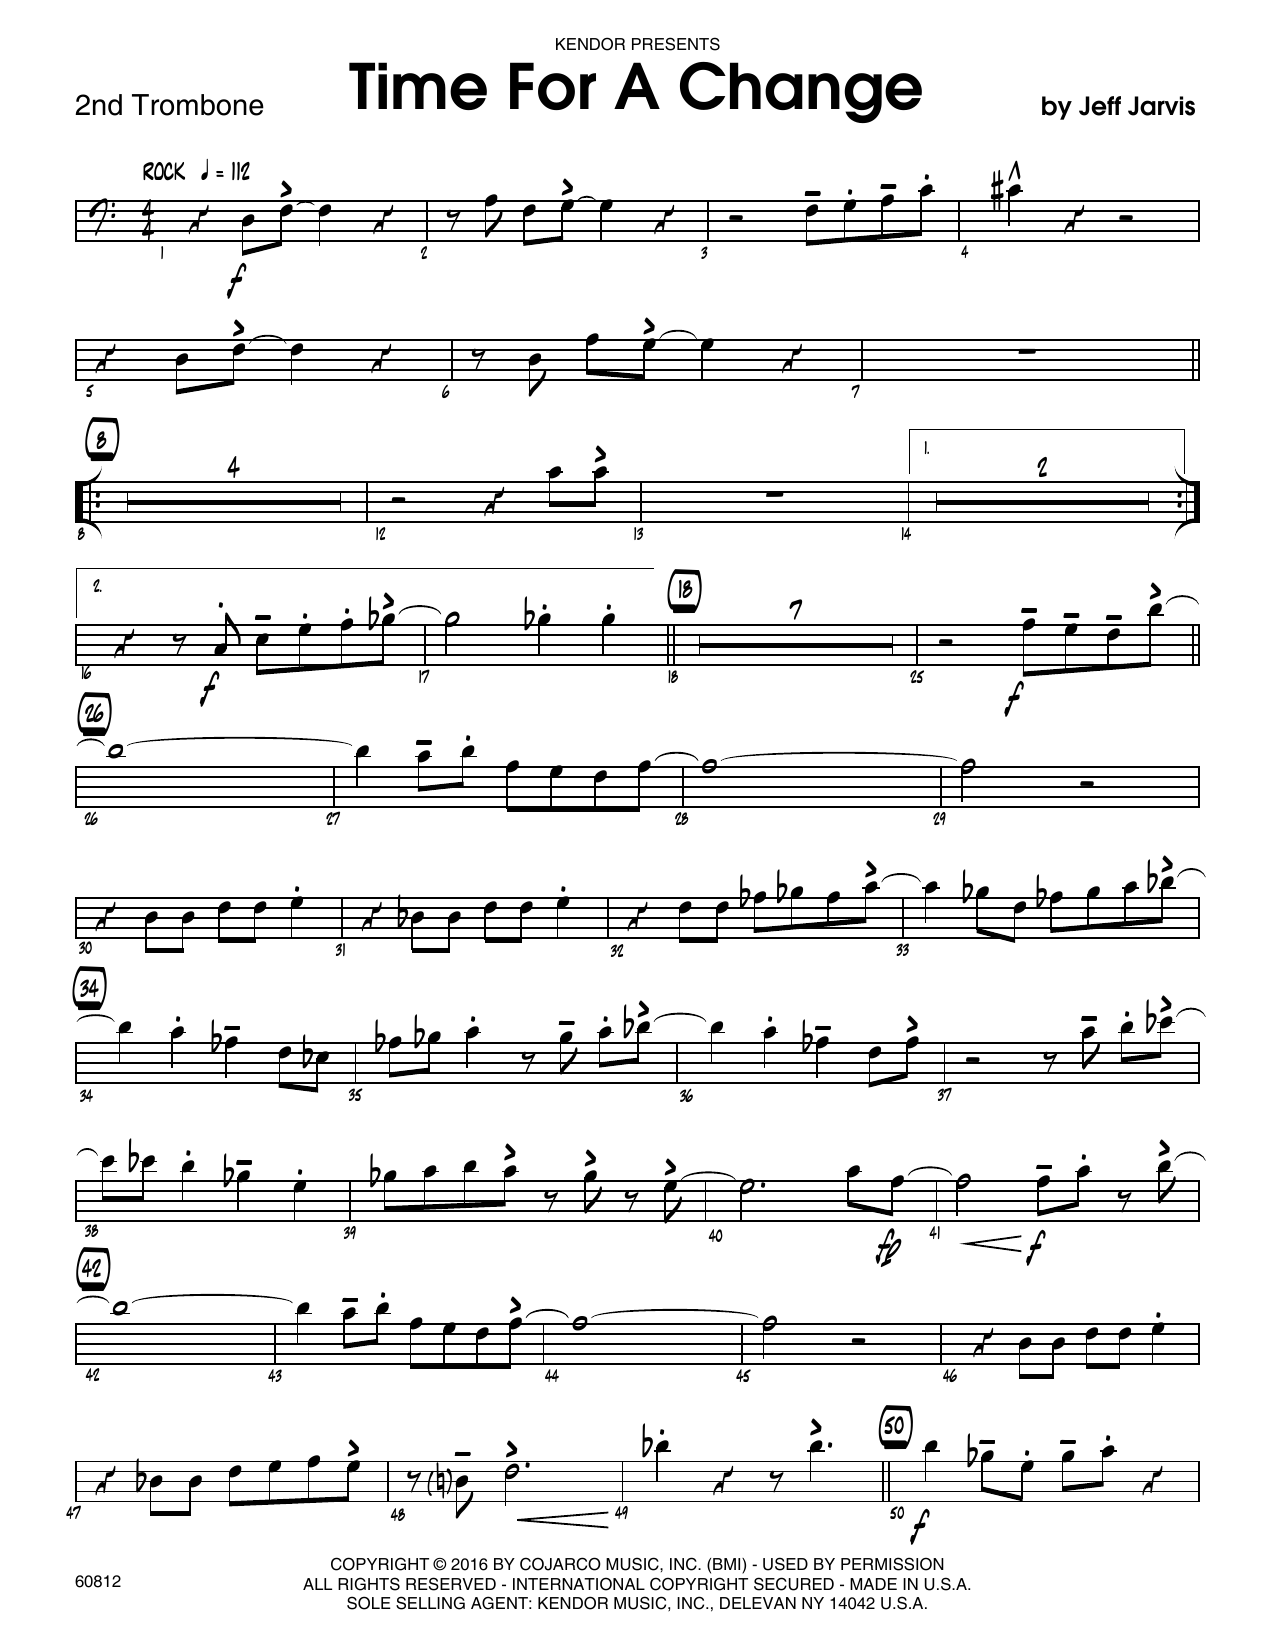 Download Jeff Jarvis Time For A Change - 2nd Trombone Sheet Music